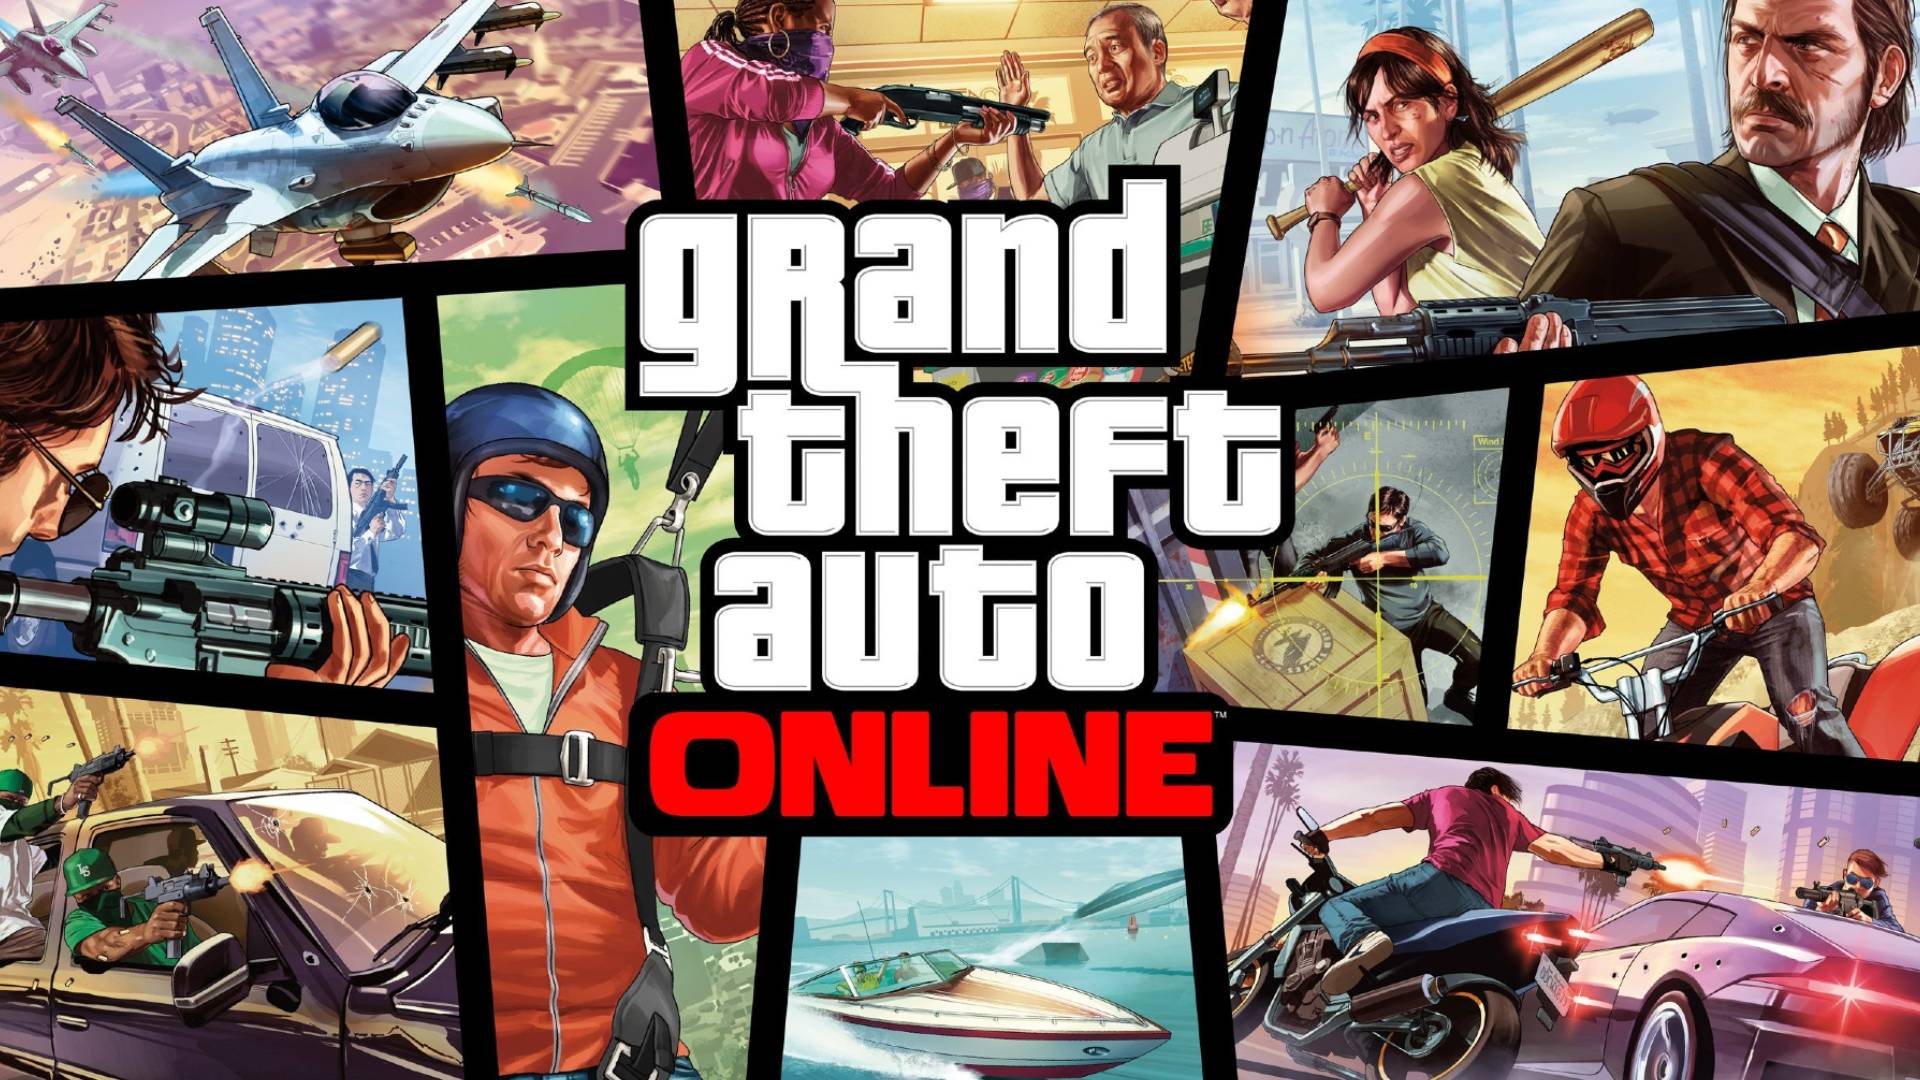 GTA Online servers for PS3 and Xbox 360 are shutting down in December